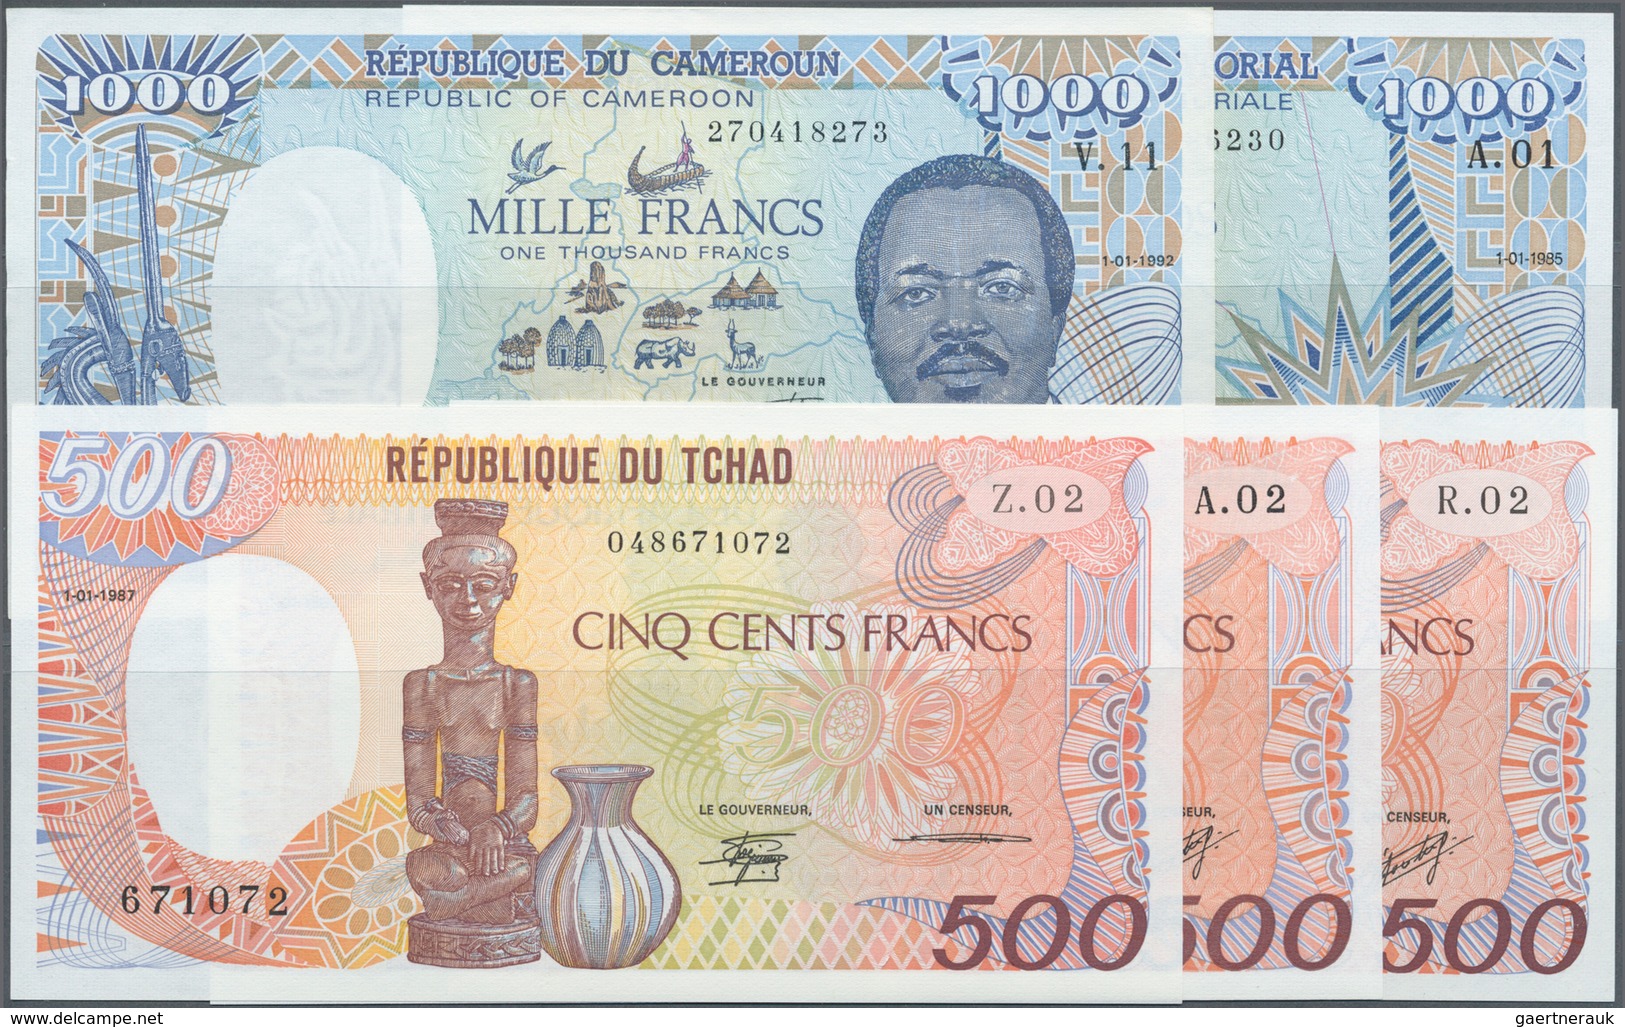 Africa / Afrika: Interesting Set Of 5 African Banknotes Containing Central African Republic 500 Fran - Andere - Afrika